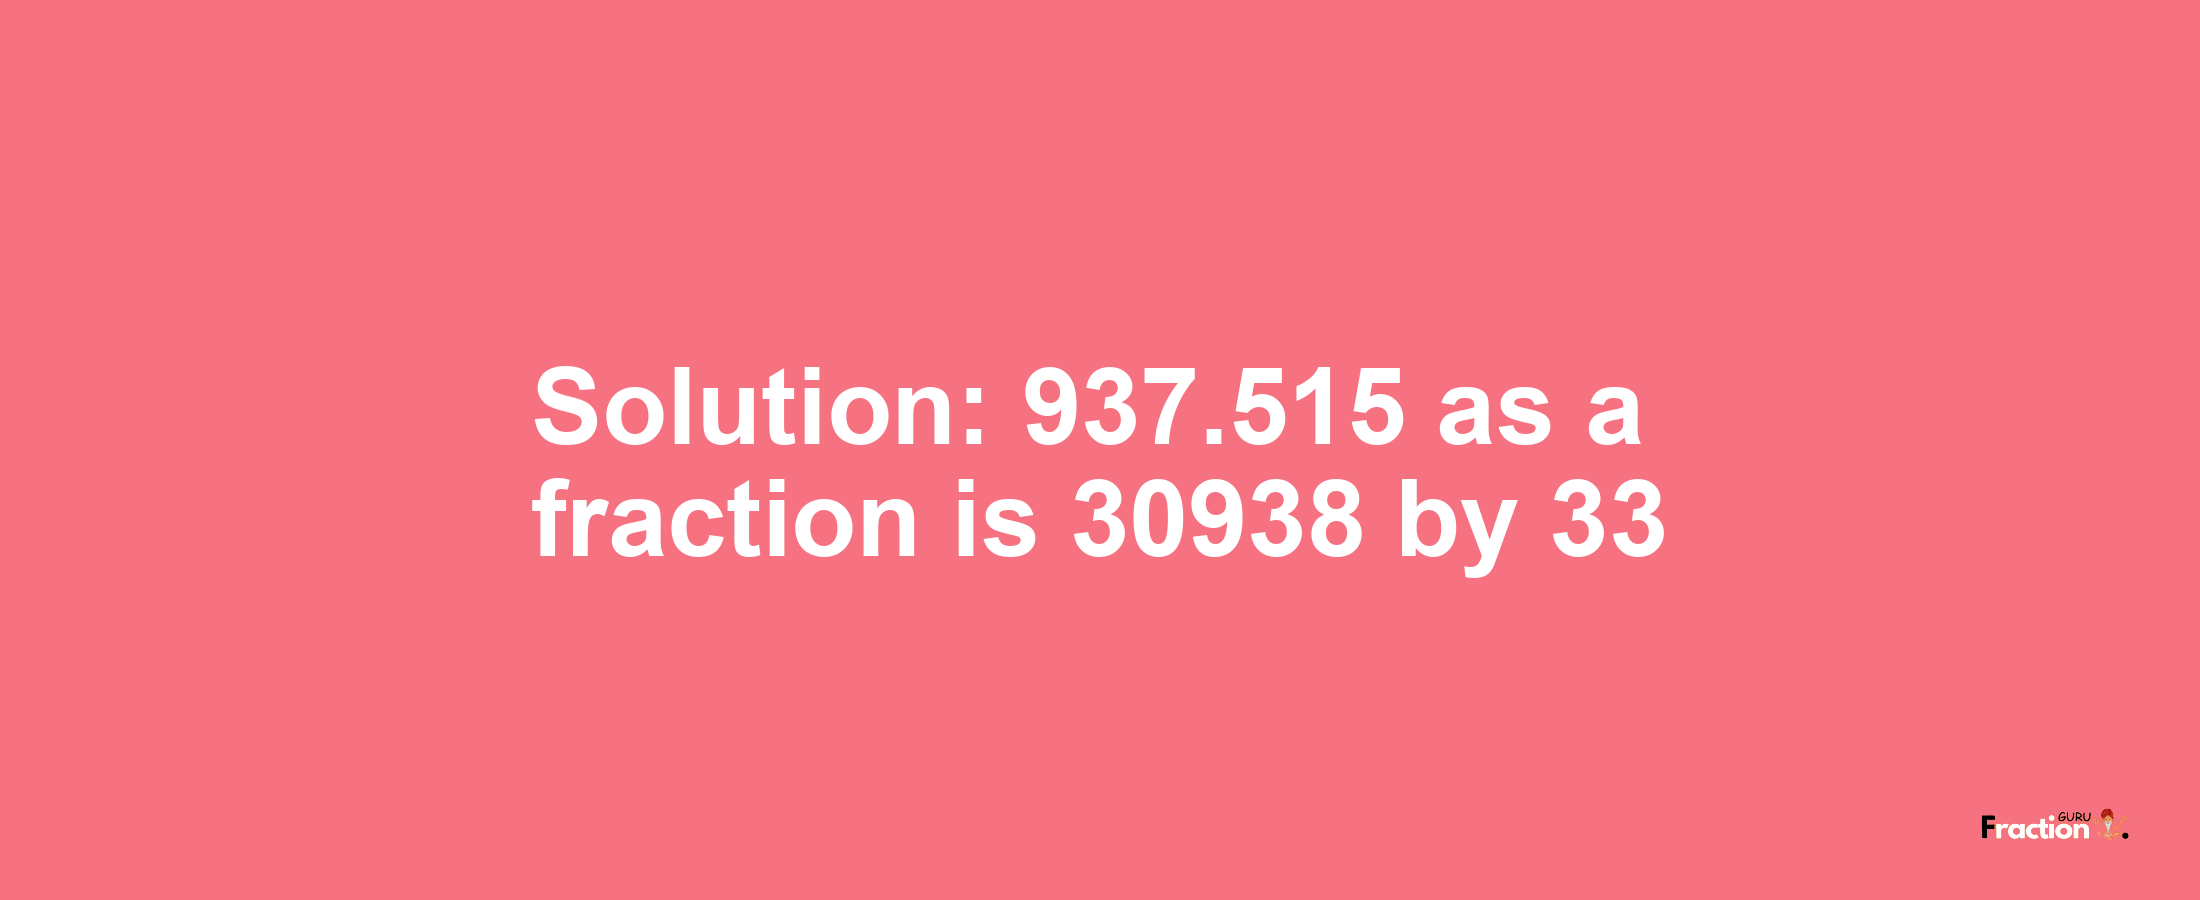 Solution:937.515 as a fraction is 30938/33